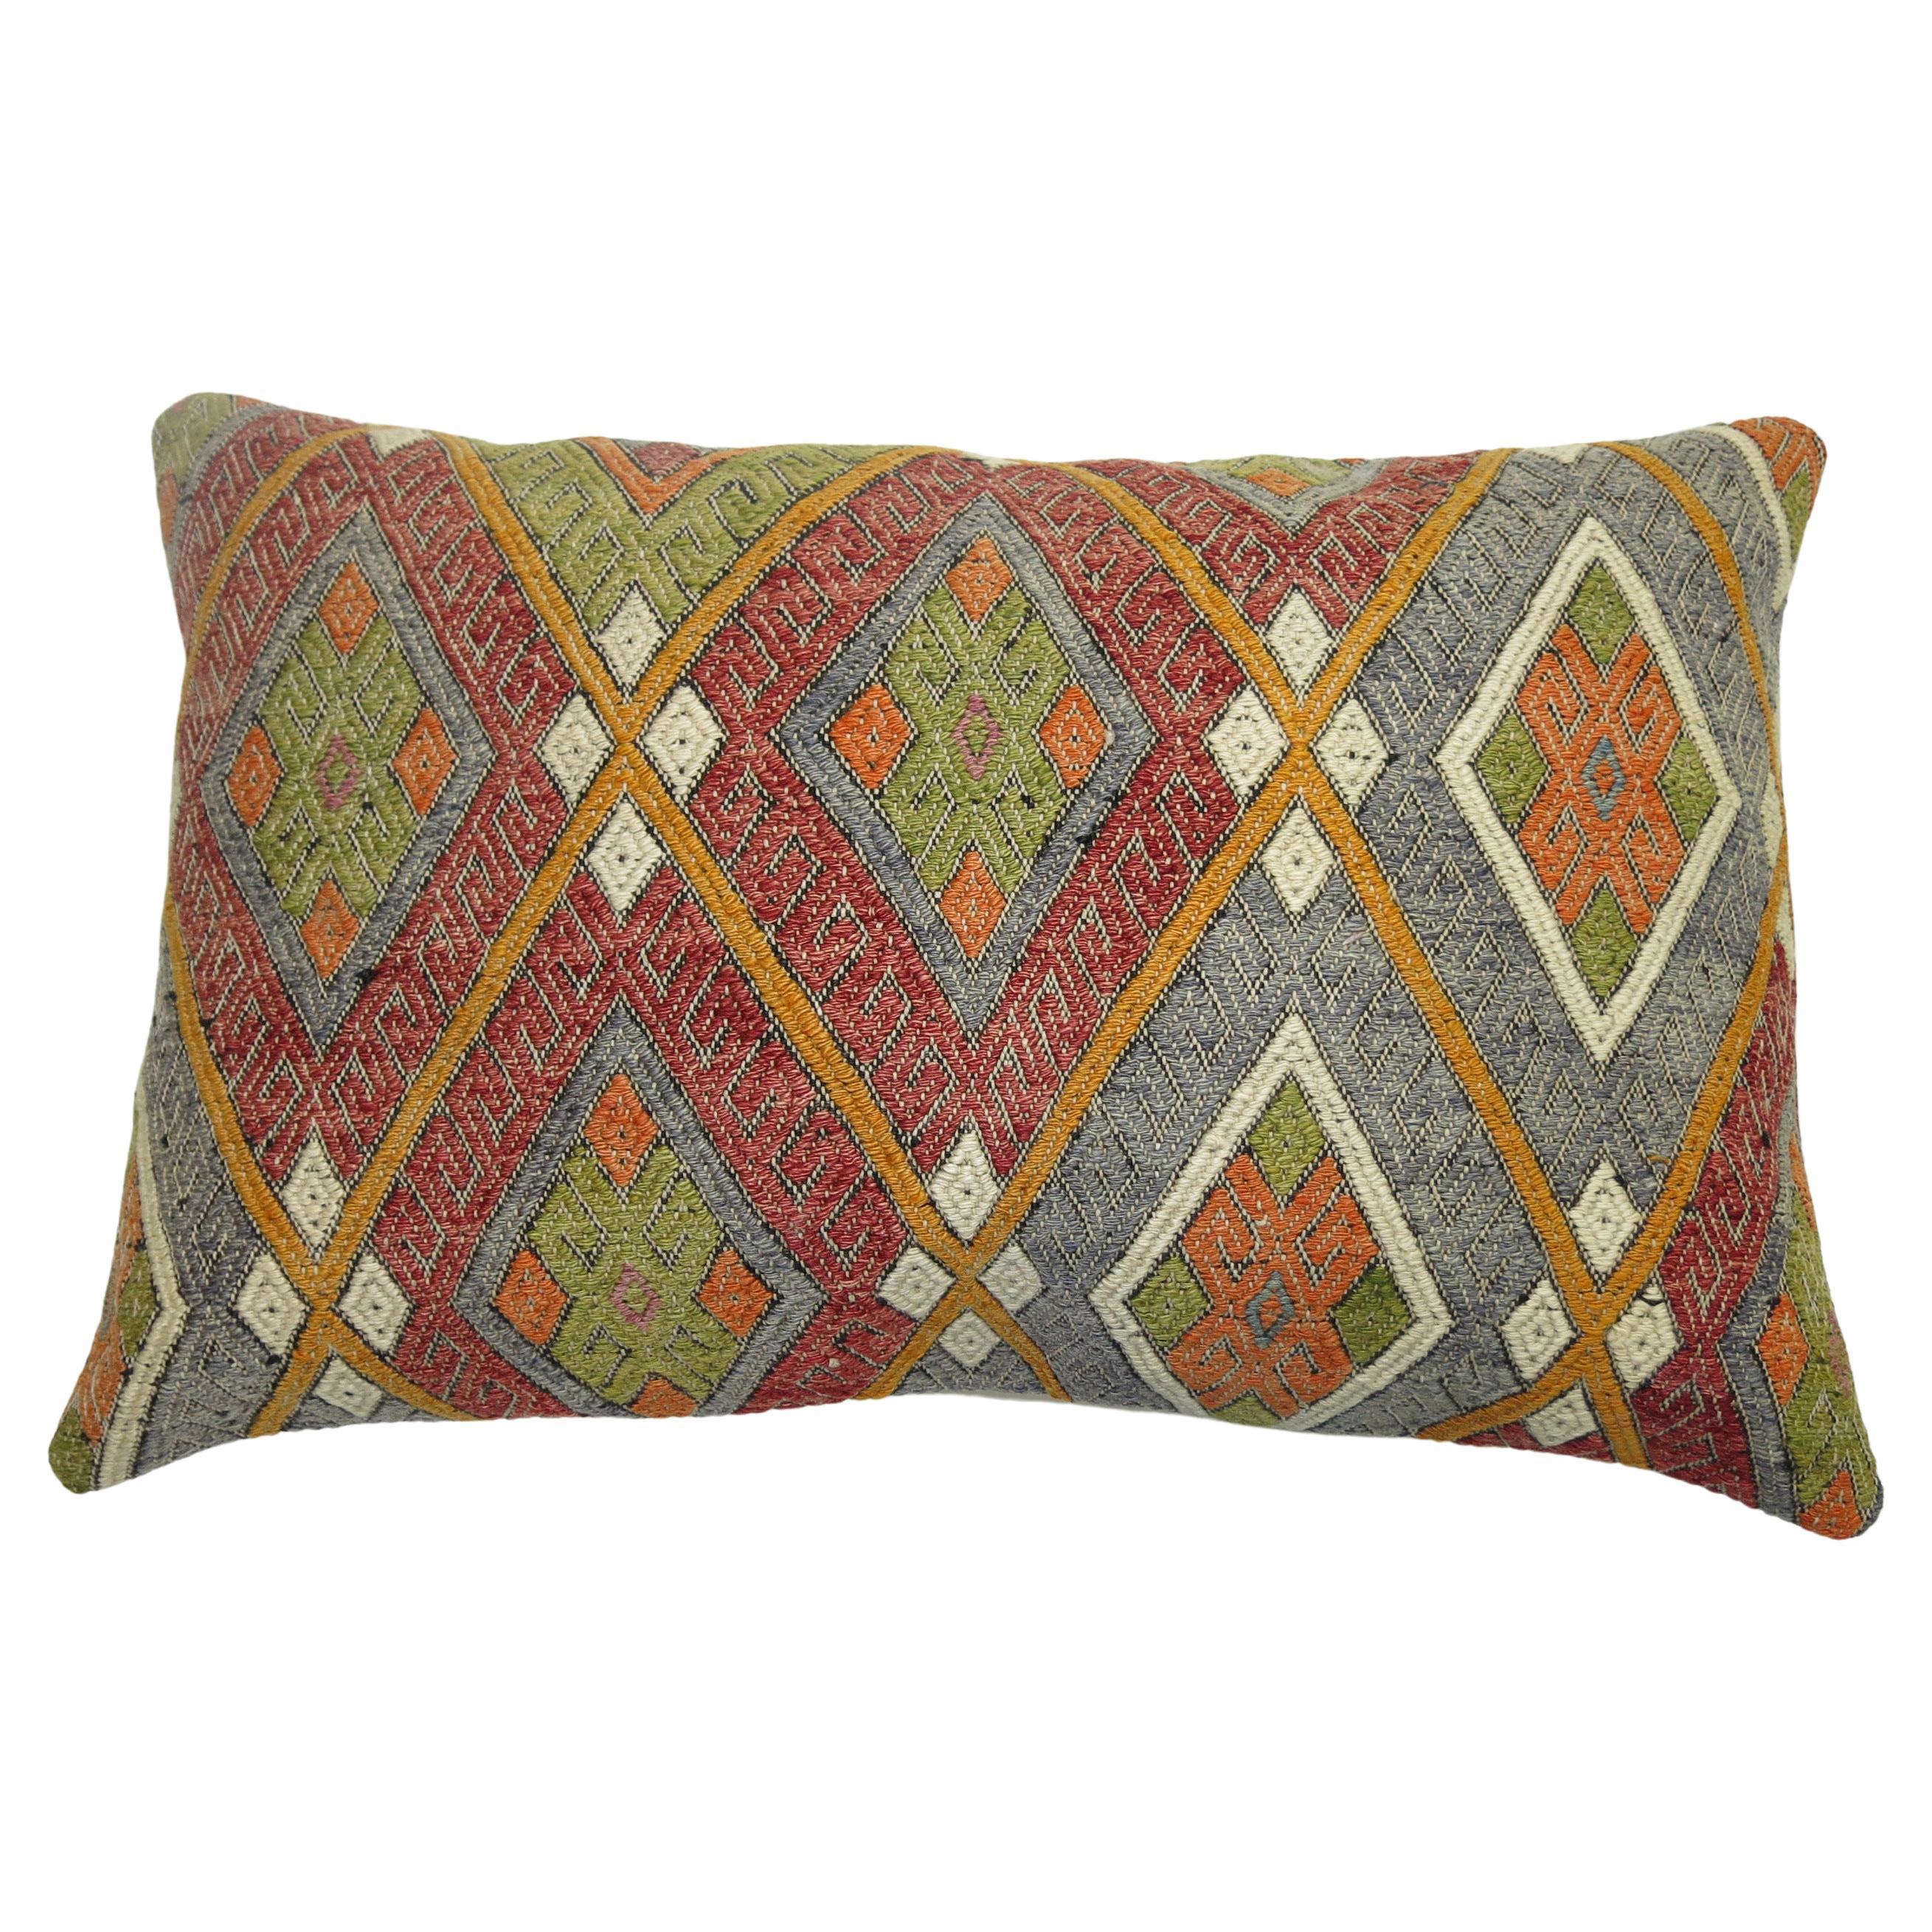 Pillow made from a cicim Turkish flat-weave technique pillow.

Size: 17